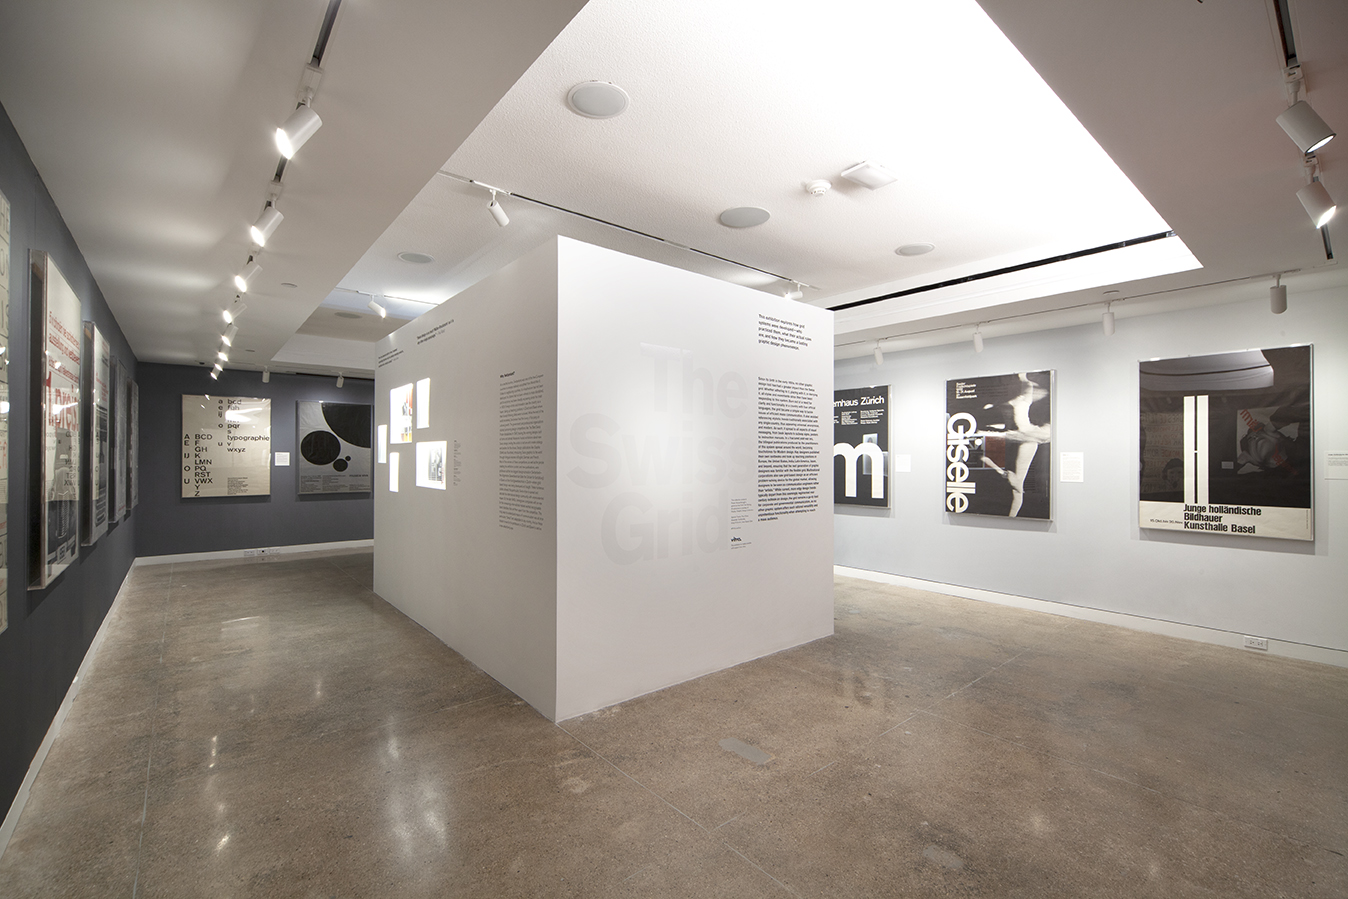 The Swiss Grid gallery viewing space with white and gray walls and black and white framed posters with clean, clear text.